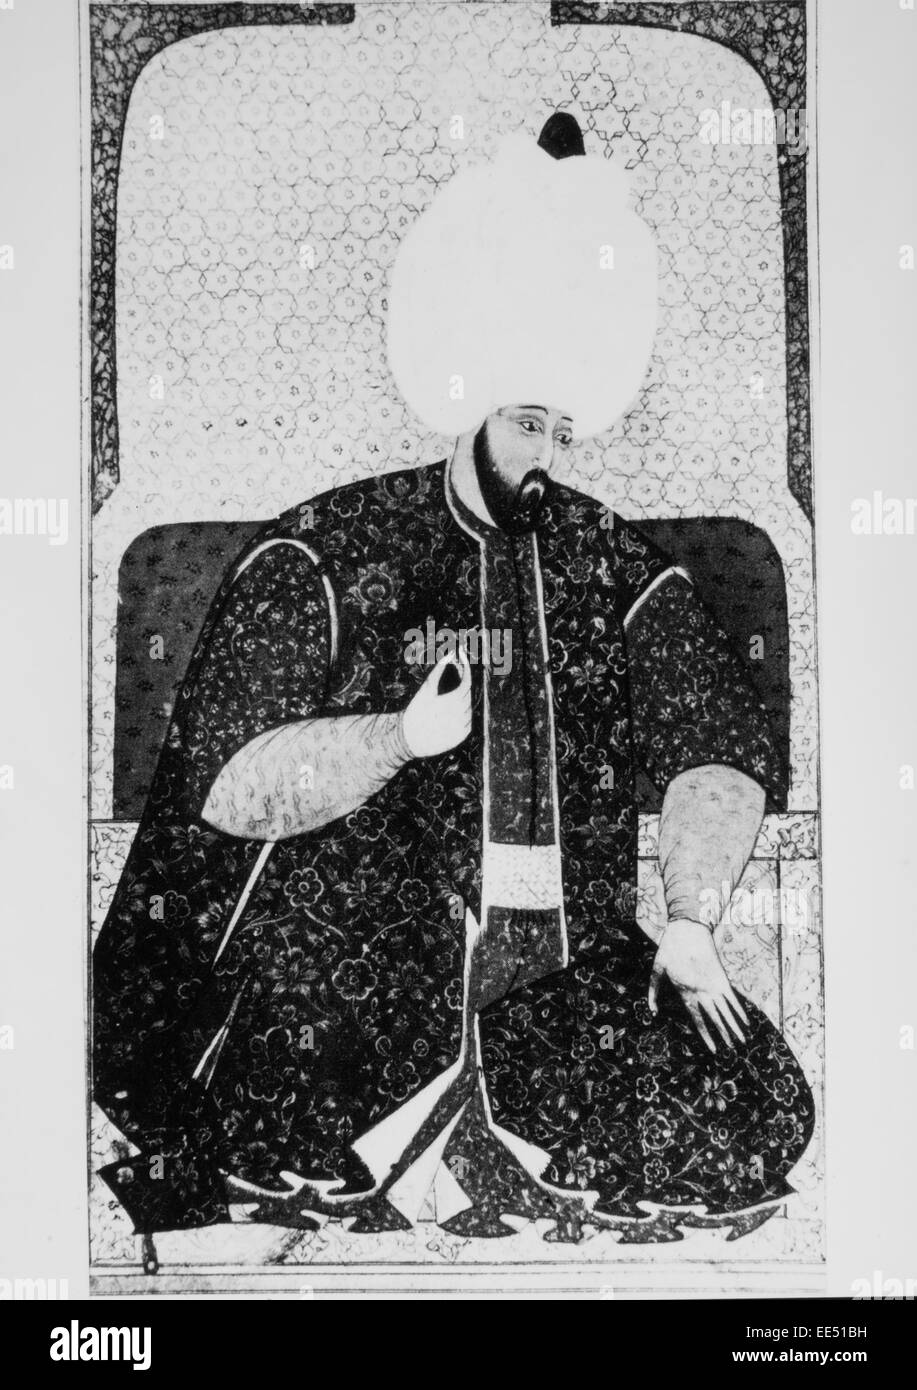 Sulayman I or Sulayman the Magnificent (1494-1566), Ottoman Sultan, Portrait Stock Photo